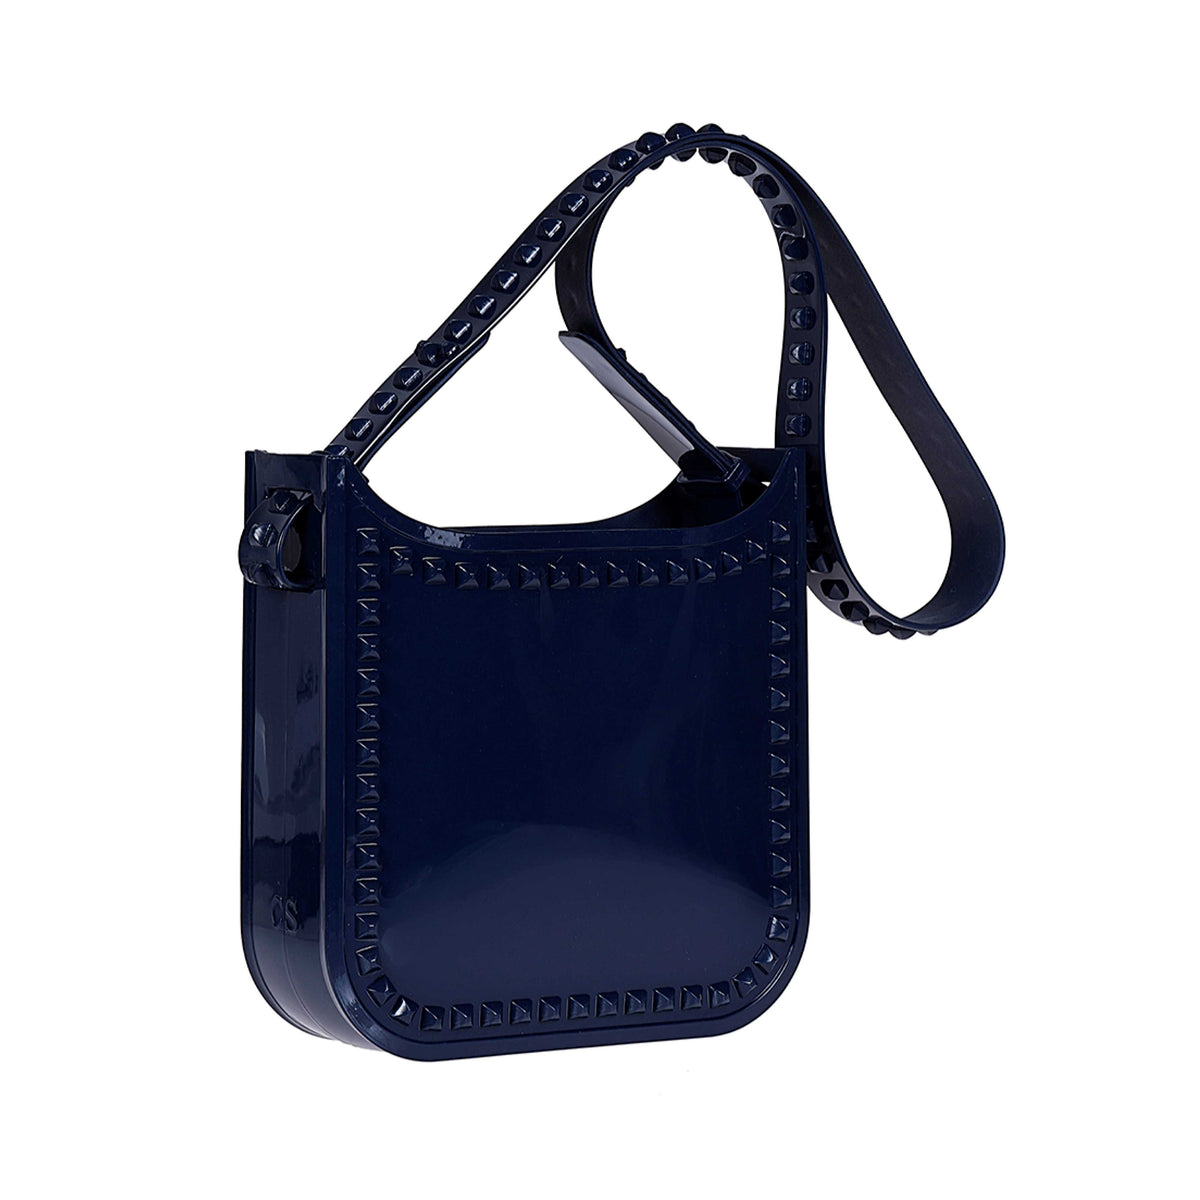 Carmen Sol Toni studded beach bags for women in color navy blue